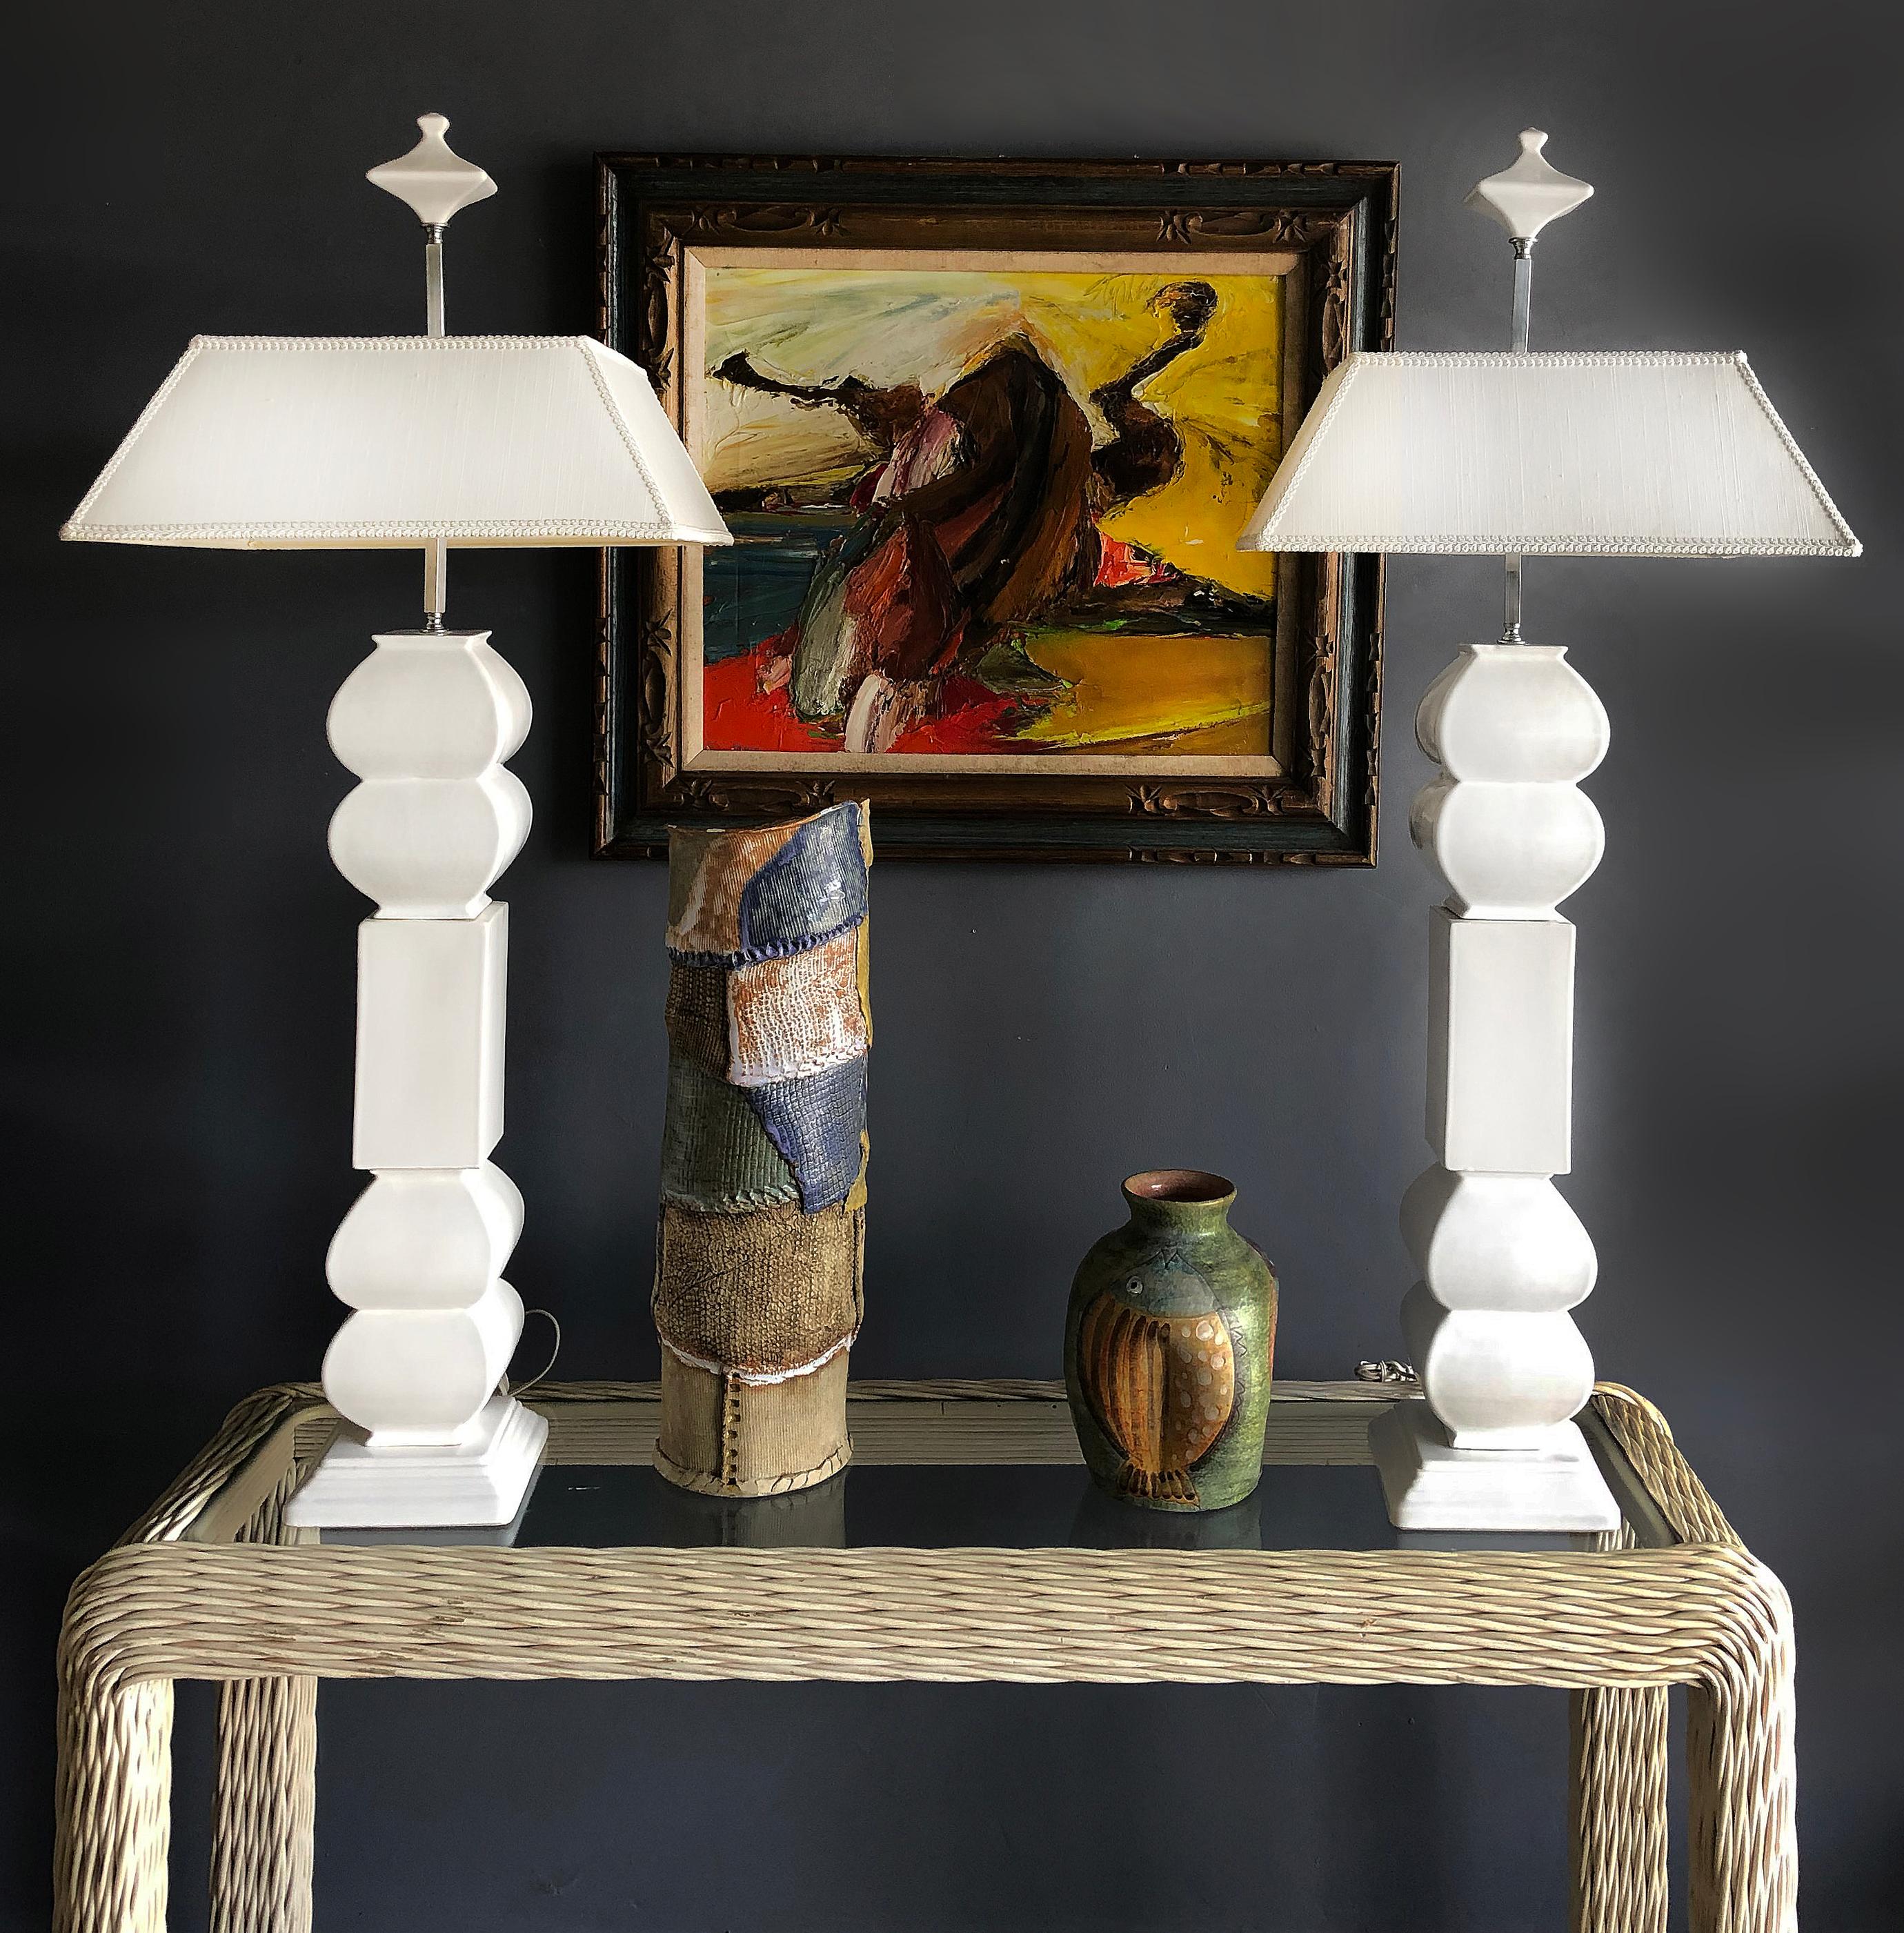 Hollywood Regency overscale ceramic table lamps, pair

Offered for sale is a pair of oversized vintage Hollywood Regency table lamps with sculptural ceramic bodies and matching finials. The shades have been recovered and the lamps are in working